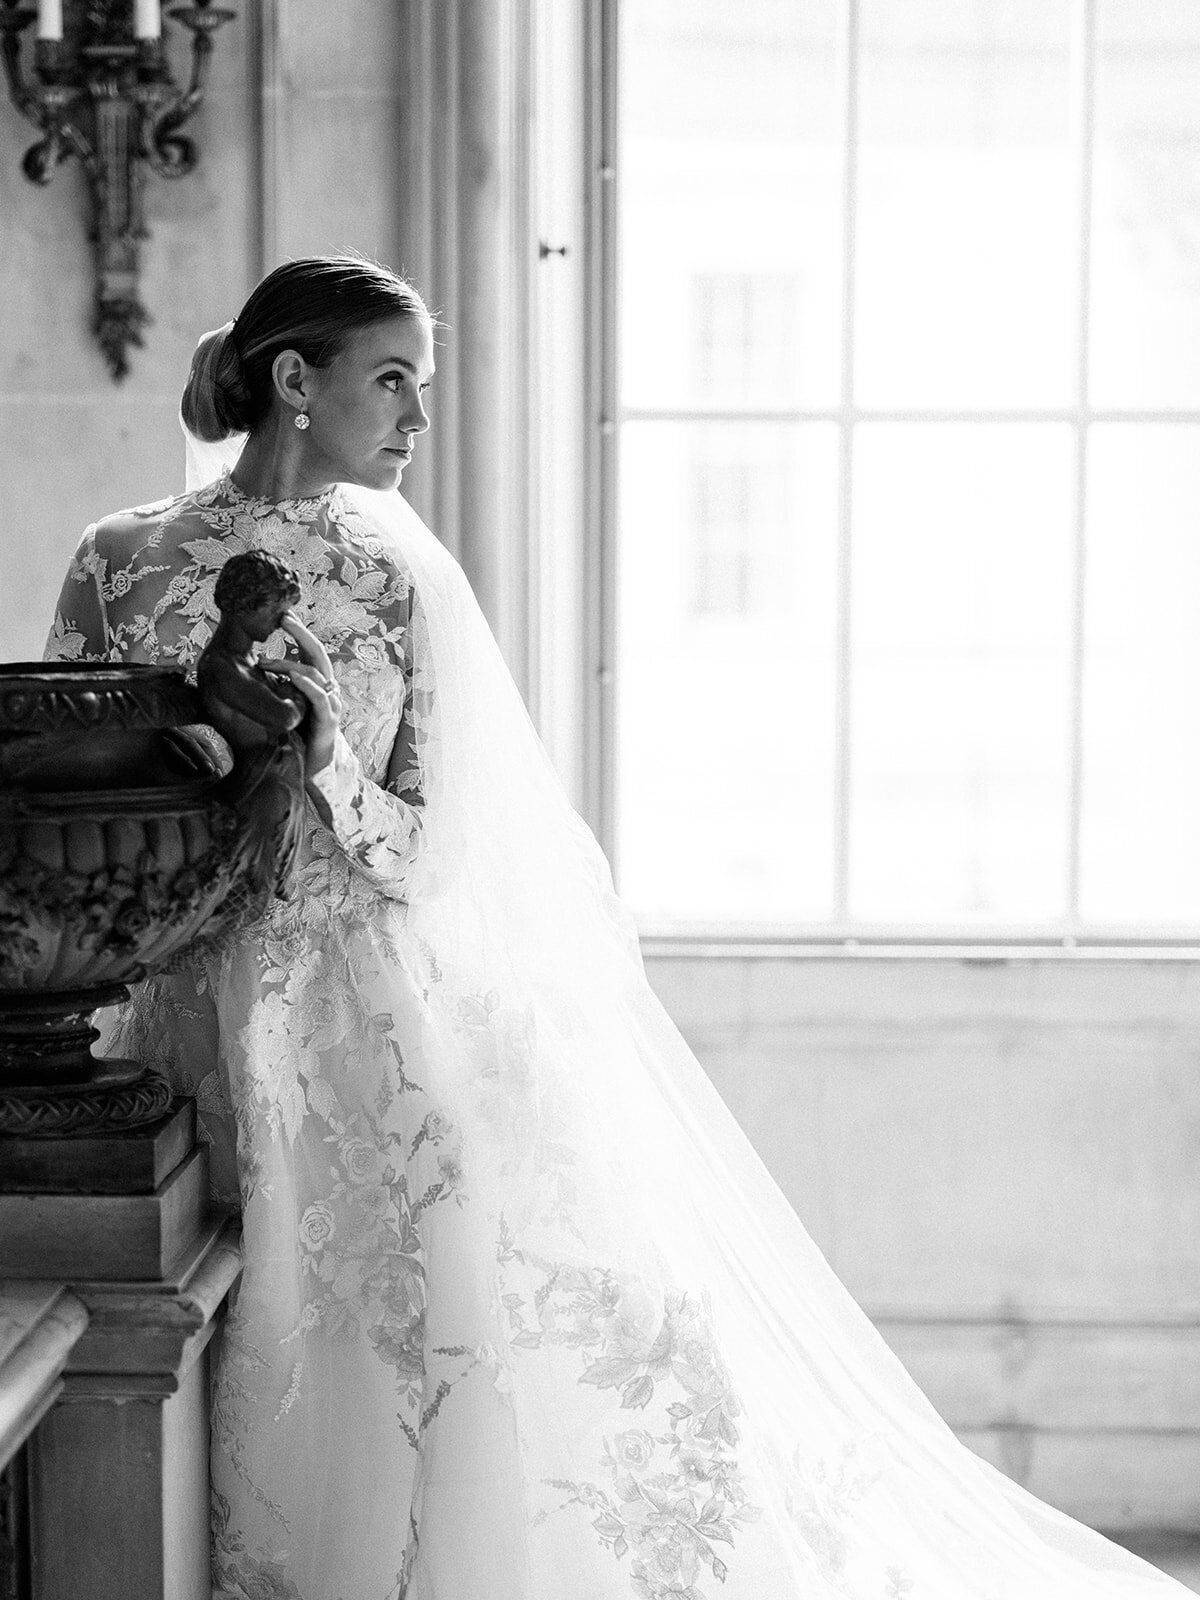 A classic black and white portrait of a brides profile showcasing her veil through the window light